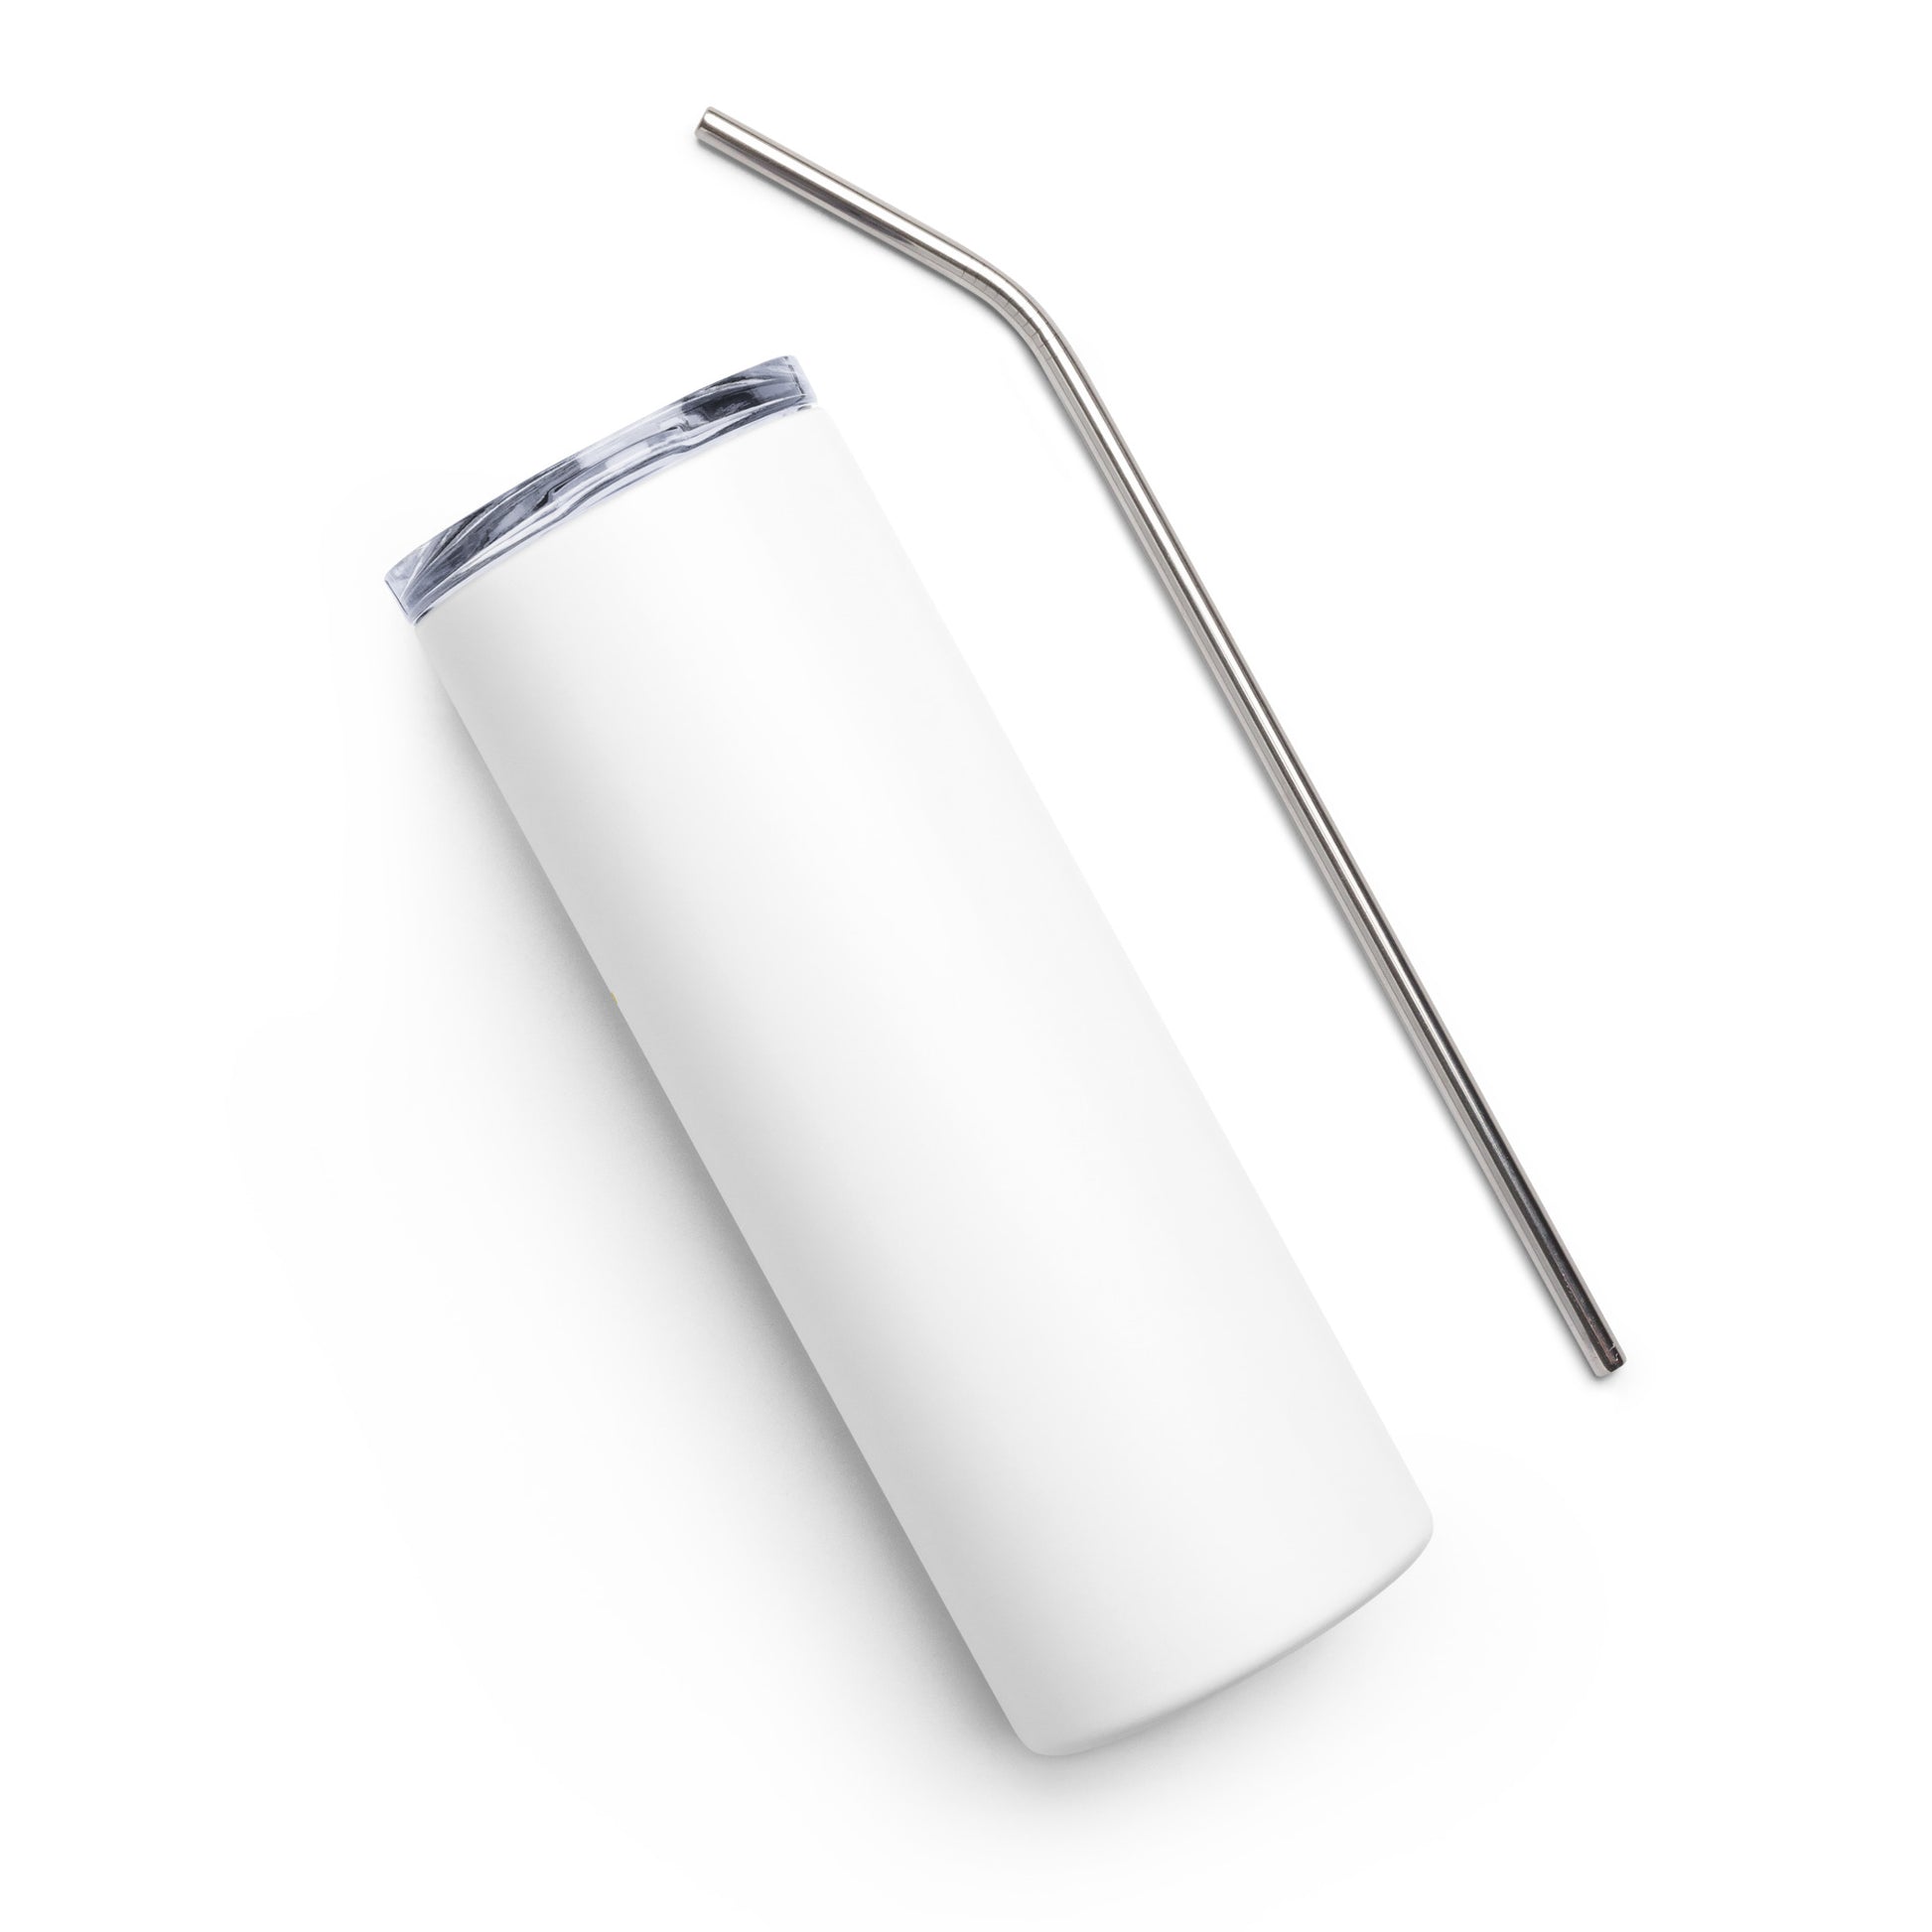 Stainless Steel Tumbler | Better Outcomes | White - Better Outcomes